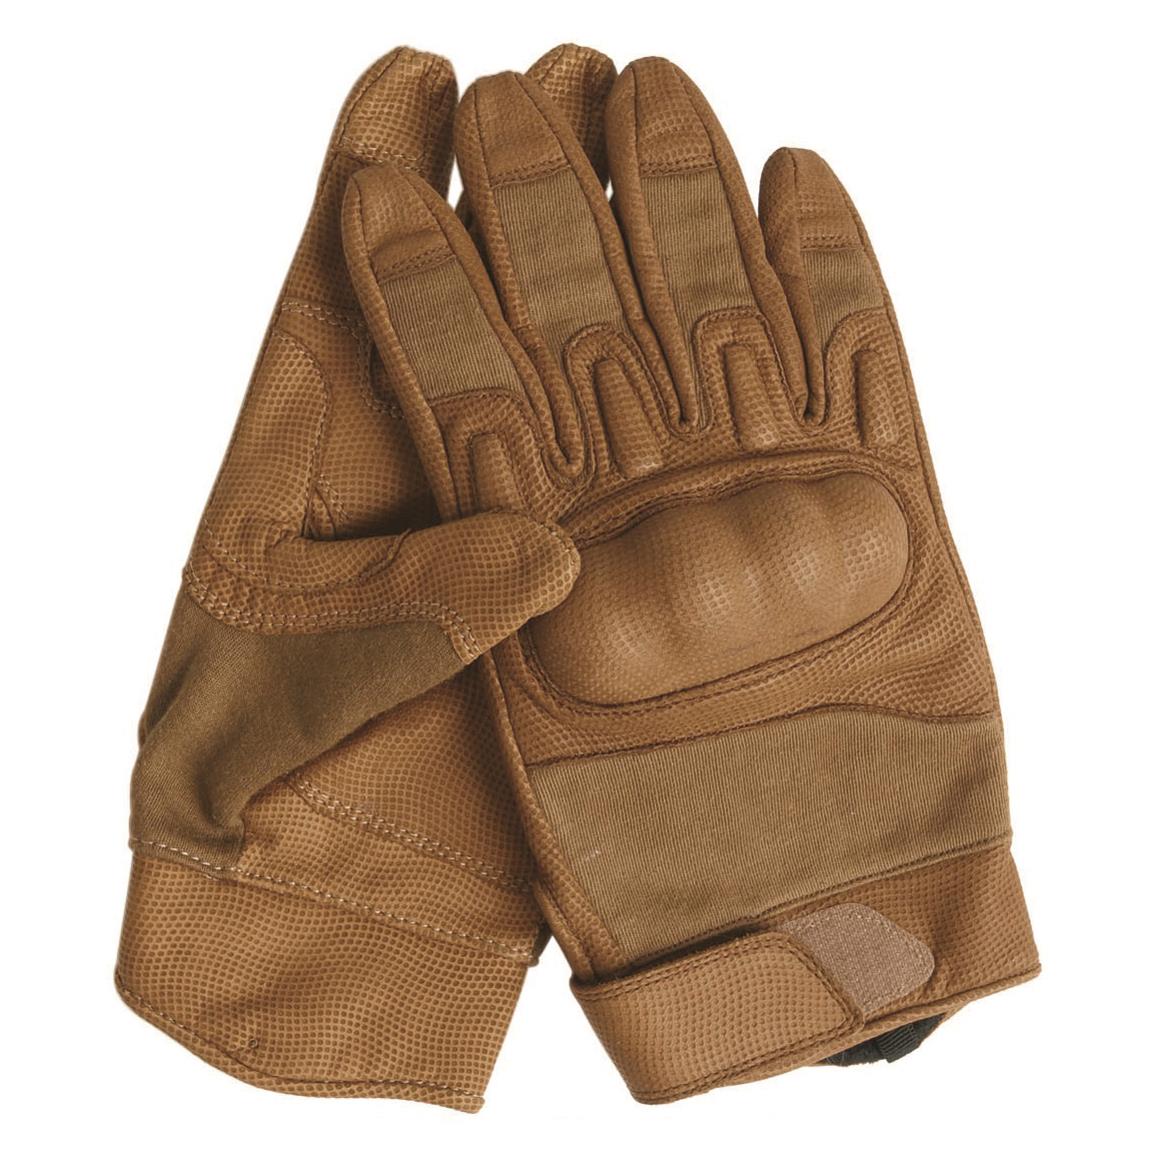 Mil-Tec Military Style Nomex Coyote Hard Knuckle Gloves